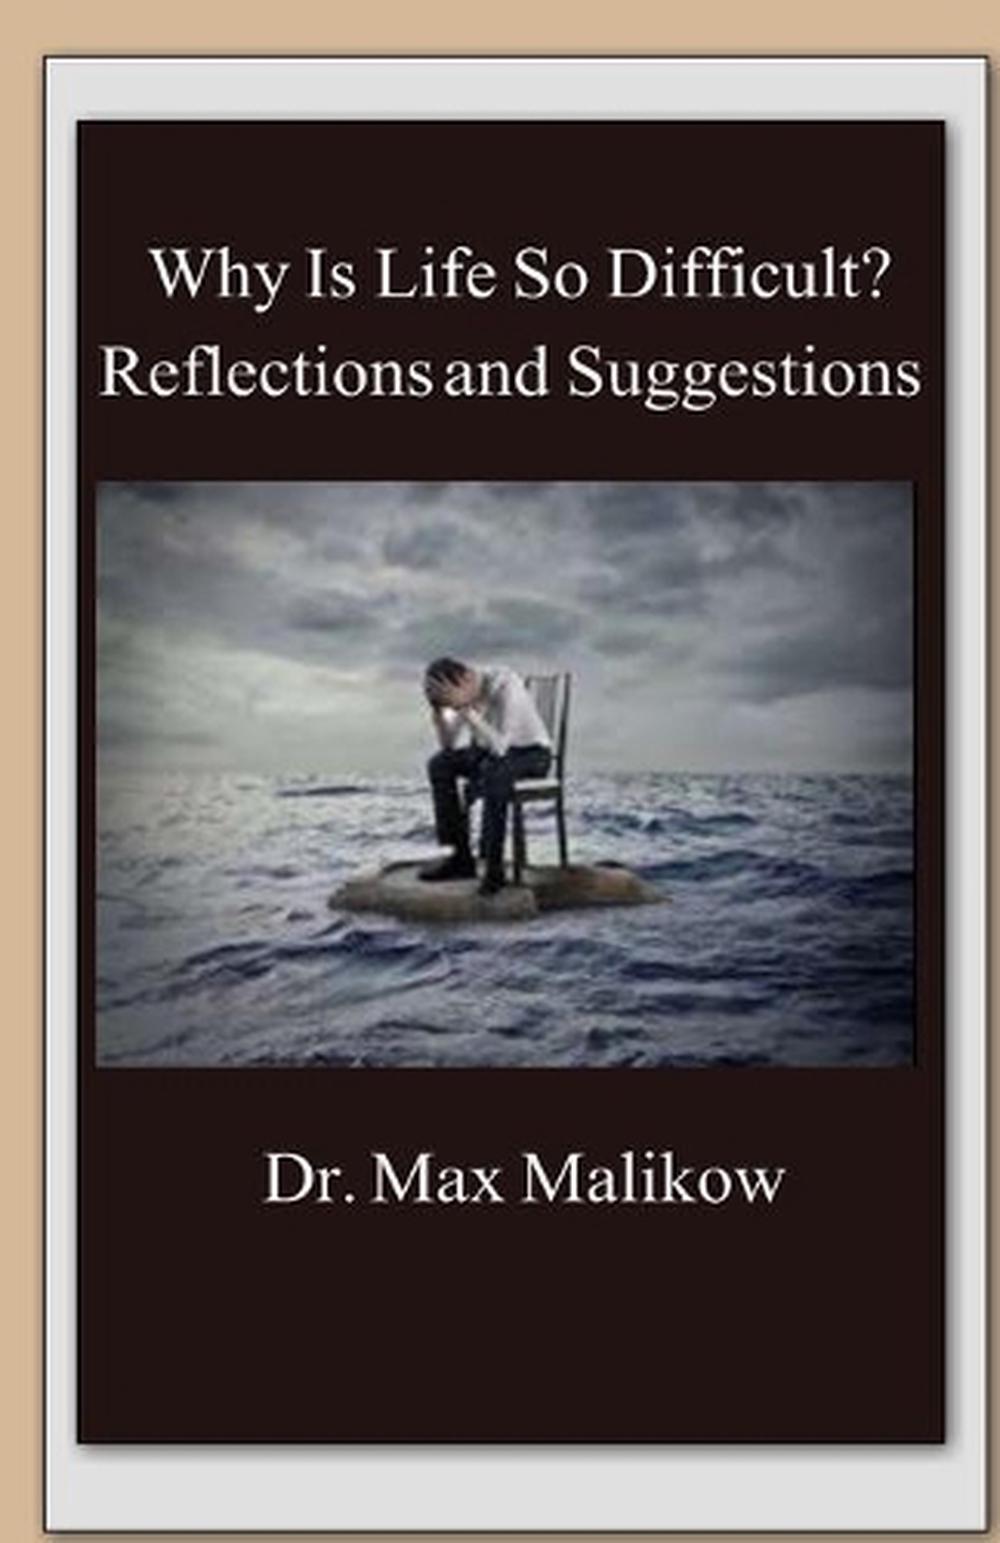 Why Is Life So Difficult? Reflections and Suggestions by Max Malikow